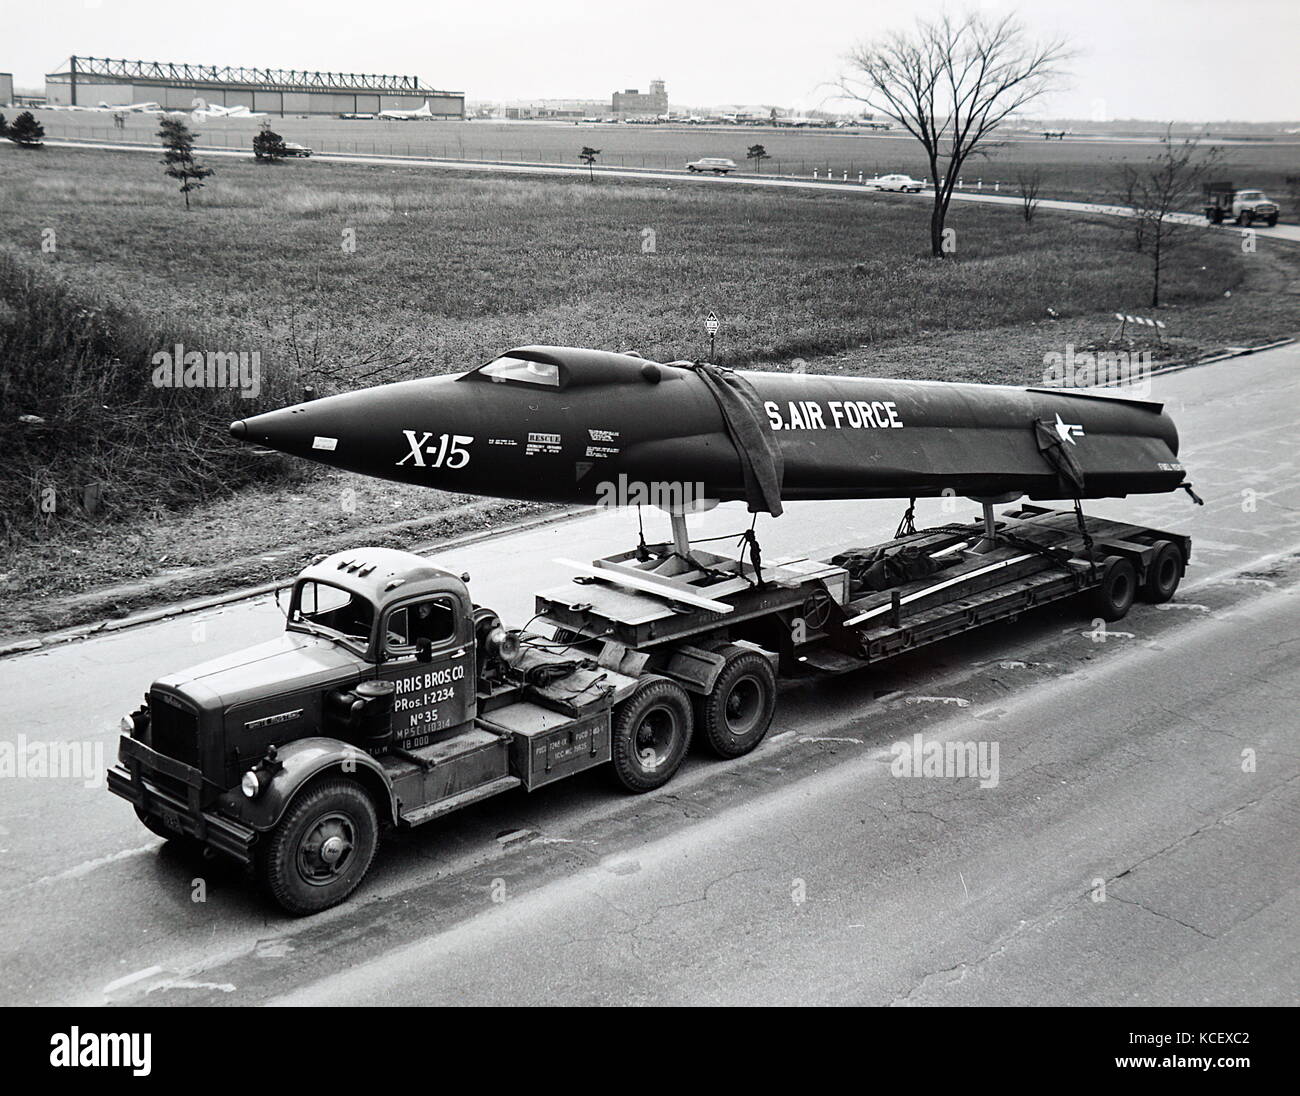 Photograph of the X-15 research aircraft being trucked to Cleveland Public Auditorium for complete assembly and display during the Space Science Fair of 1950. Dated 20th Century Stock Photo